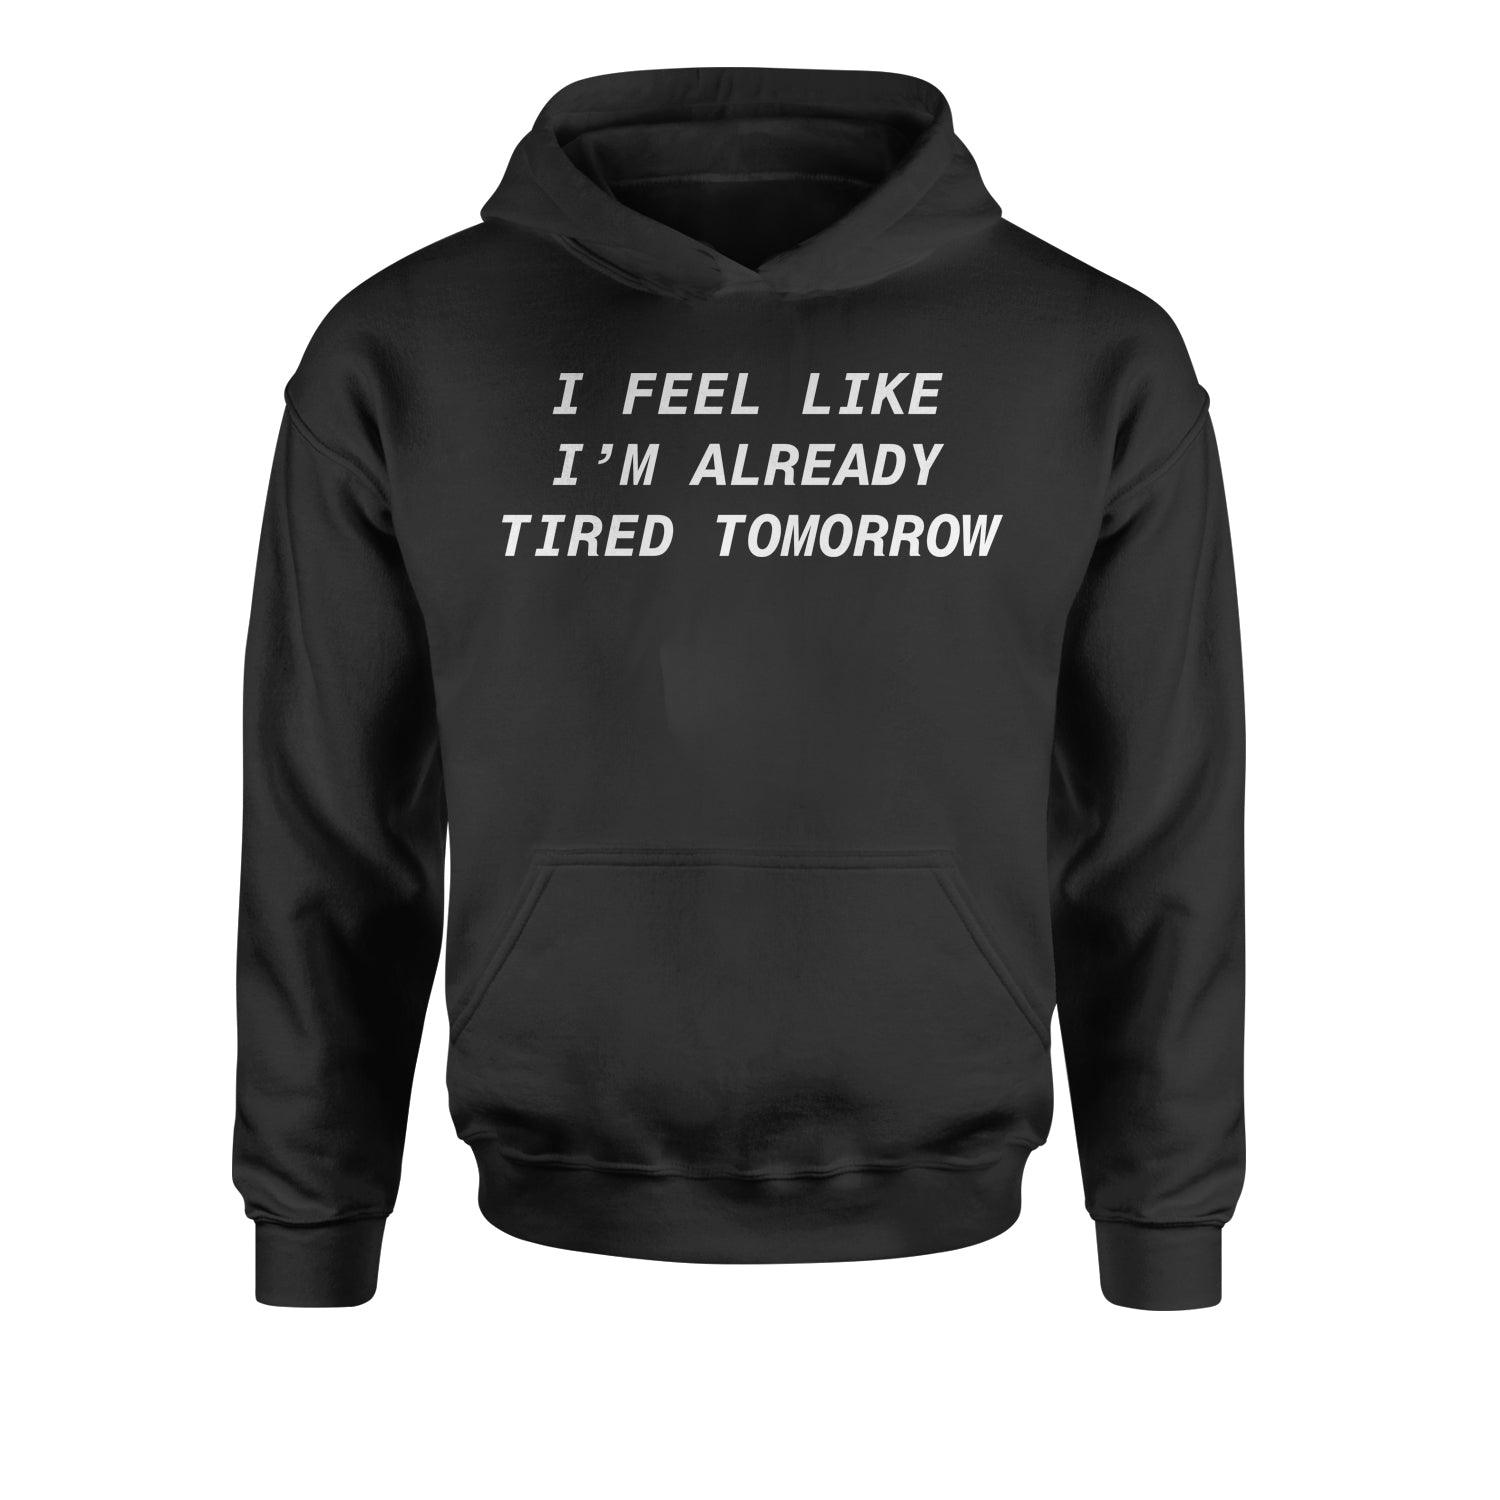 I Feel Like I'm Already Tired Tomorrow Youth-Sized Hoodie #expressiontees by Expression Tees